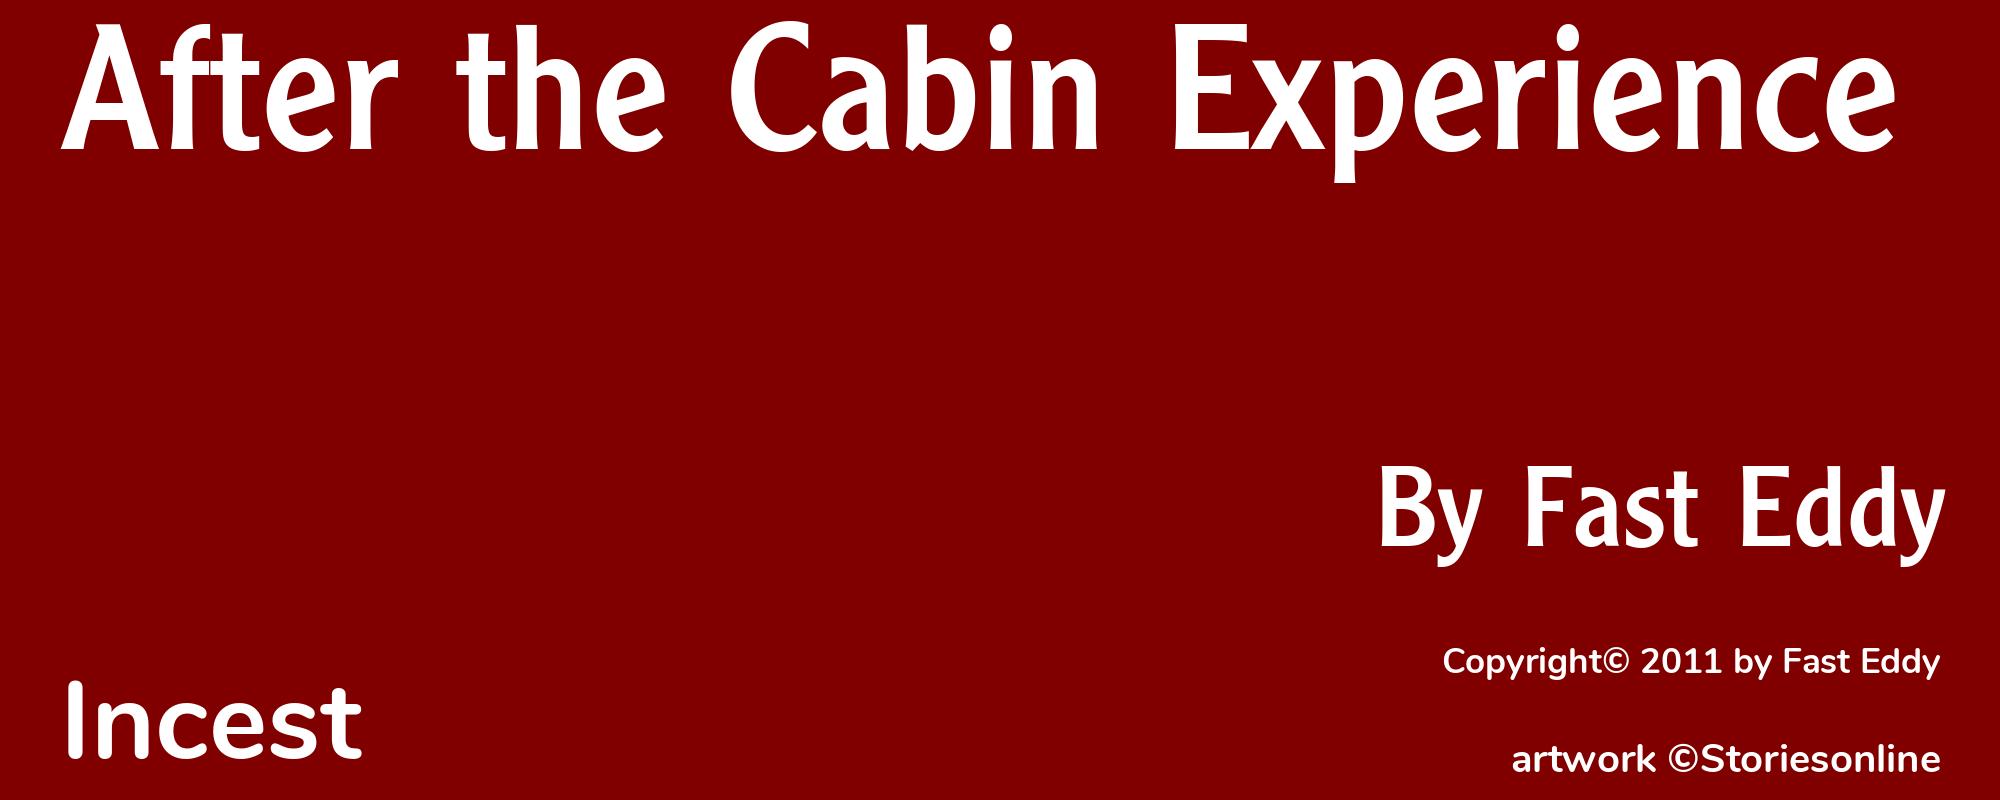 After the Cabin Experience - Cover